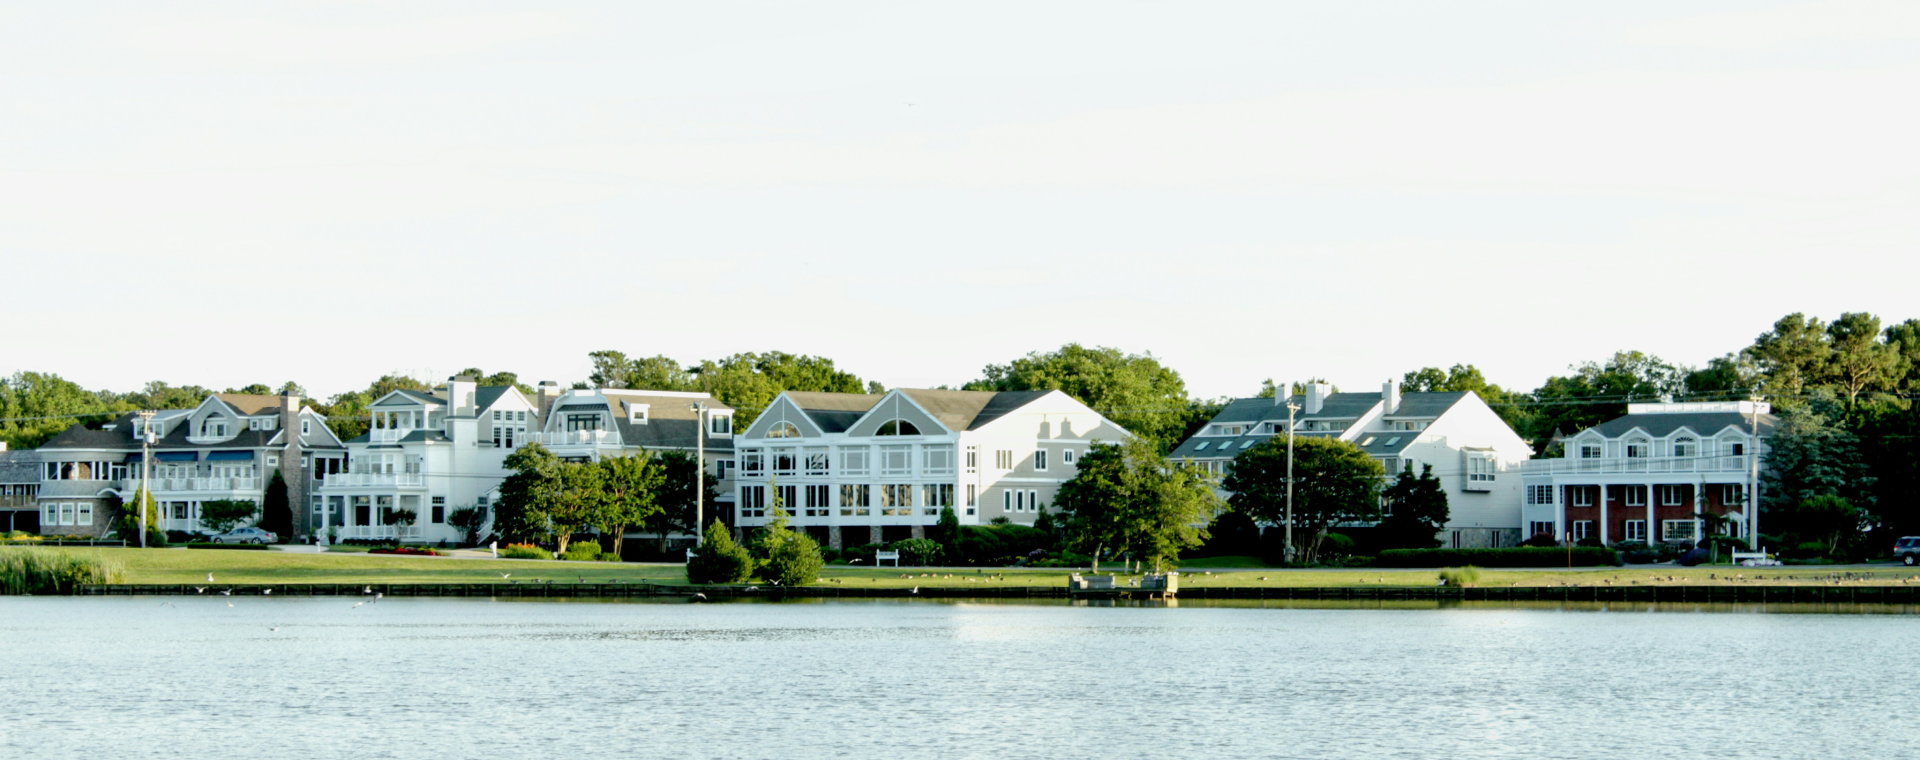 Delaware country houses by a riverbank